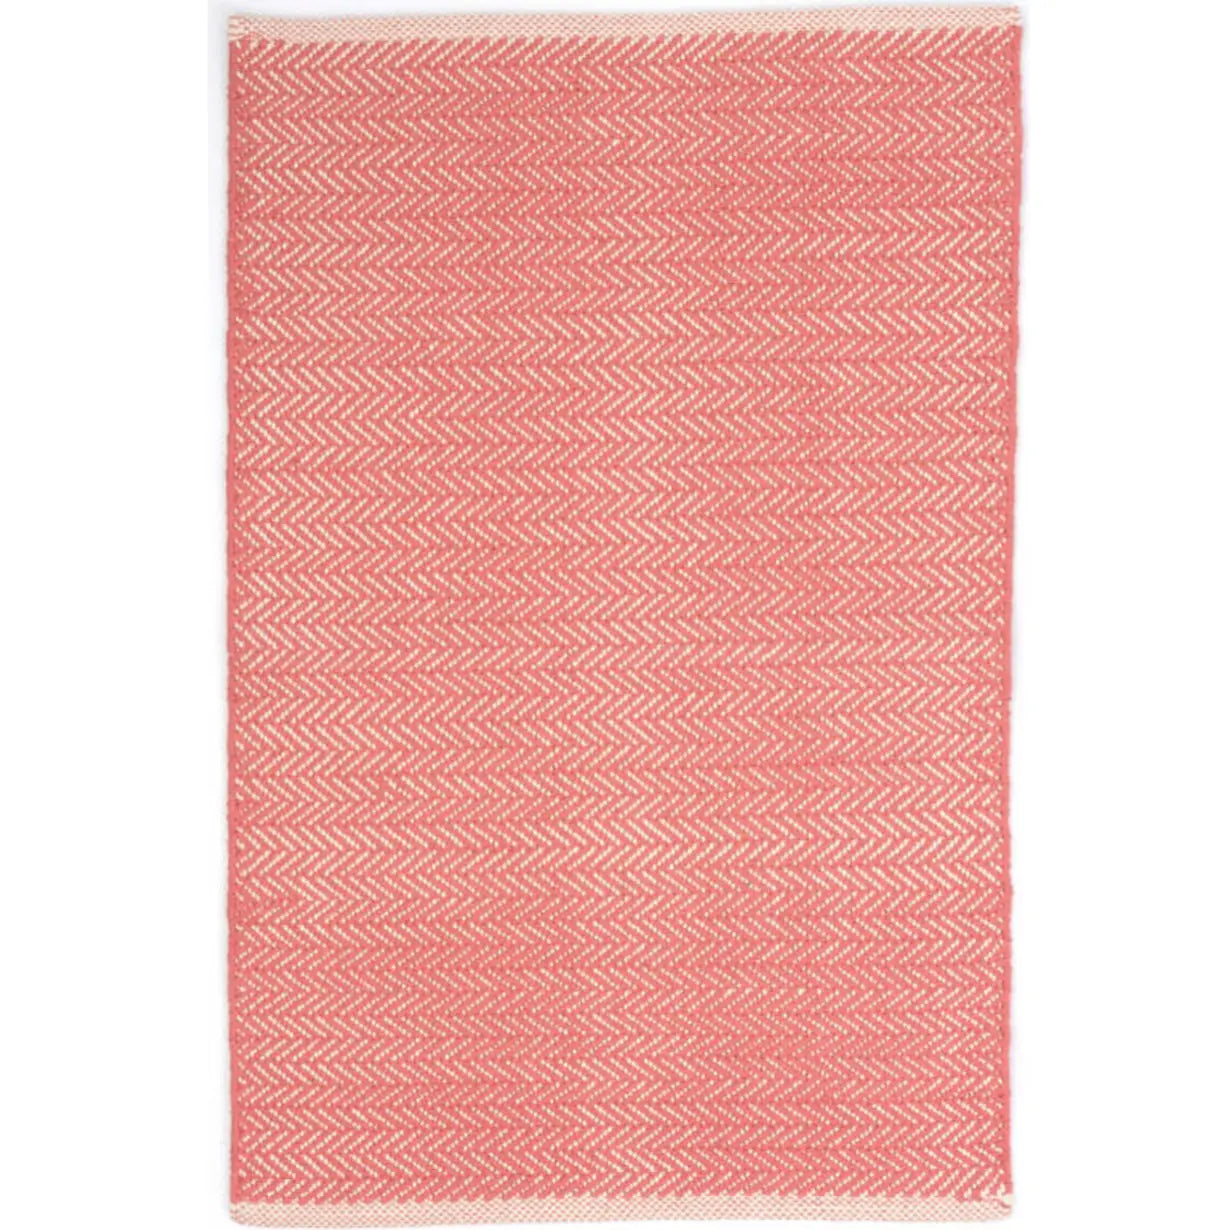 Herringbone Woven Cotton Rug in Coral - Home Smith